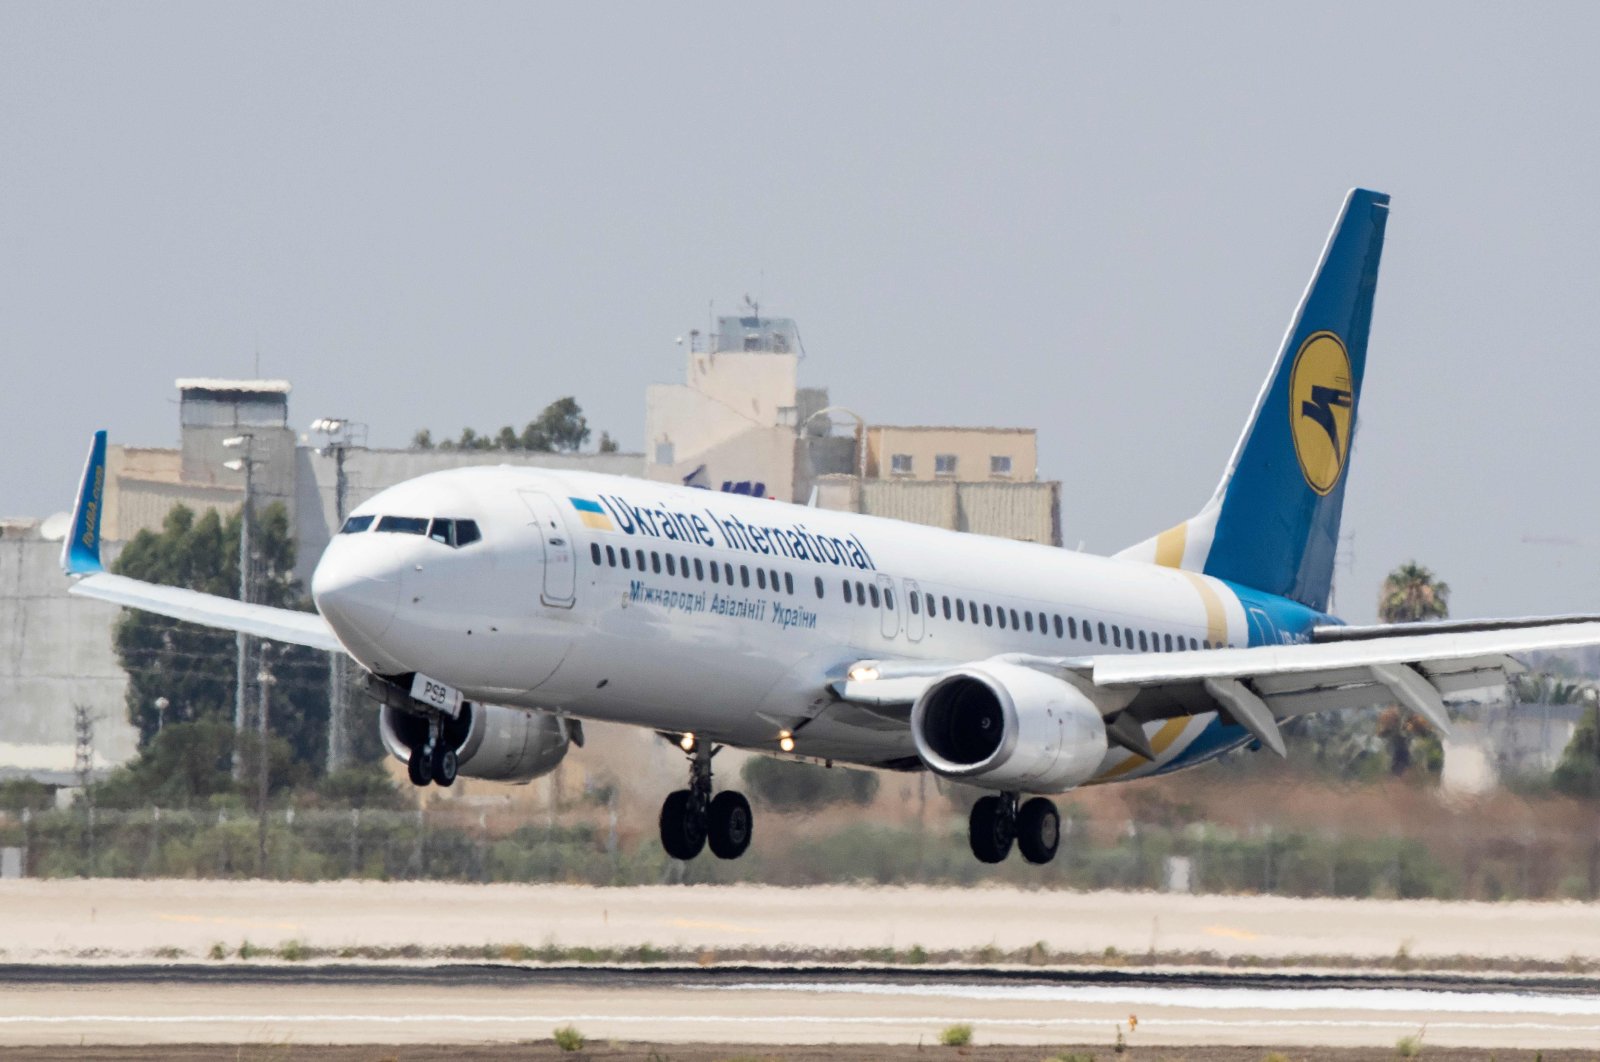 A Boeing 737-3E7 from Ukraine International Airlines lands at Ben Gurion Airport on the outskirts of Tel Aviv, Israel, July 4, 2017. (AFP Photo)